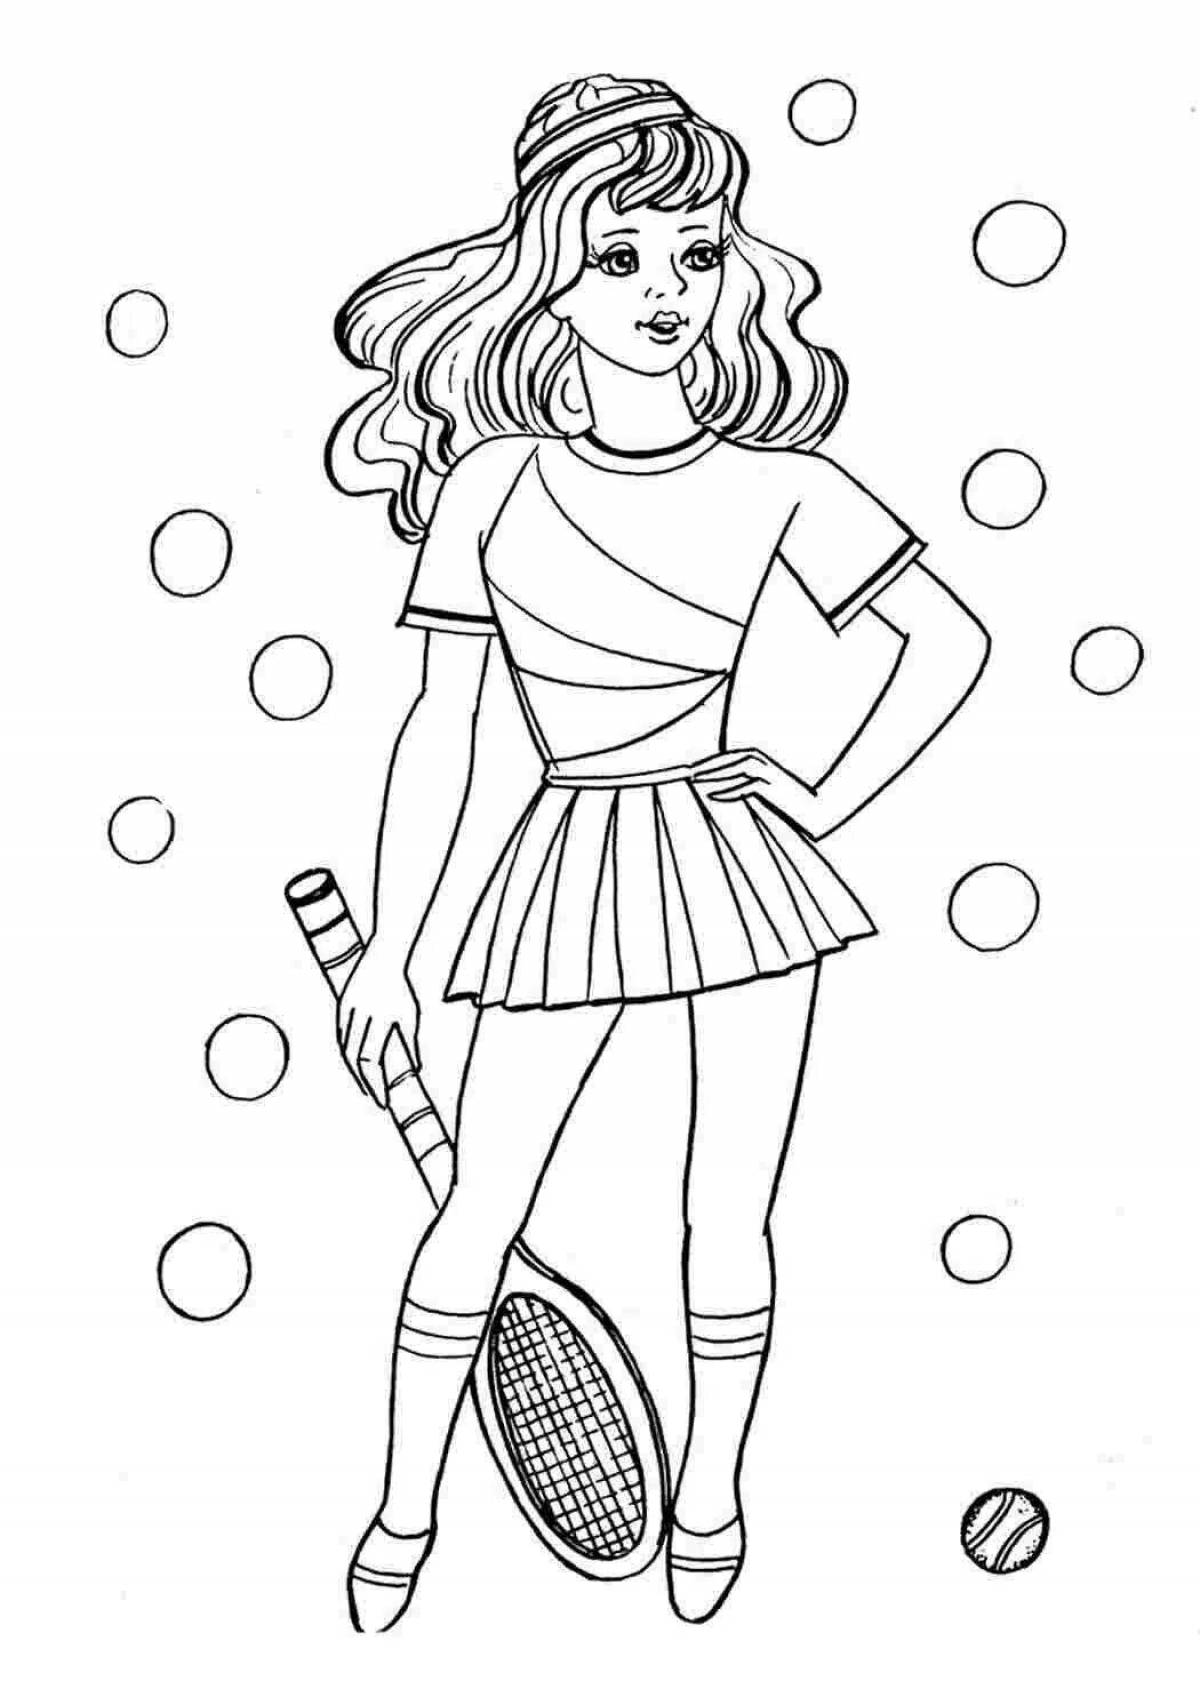 Violent coloring pages people for girls